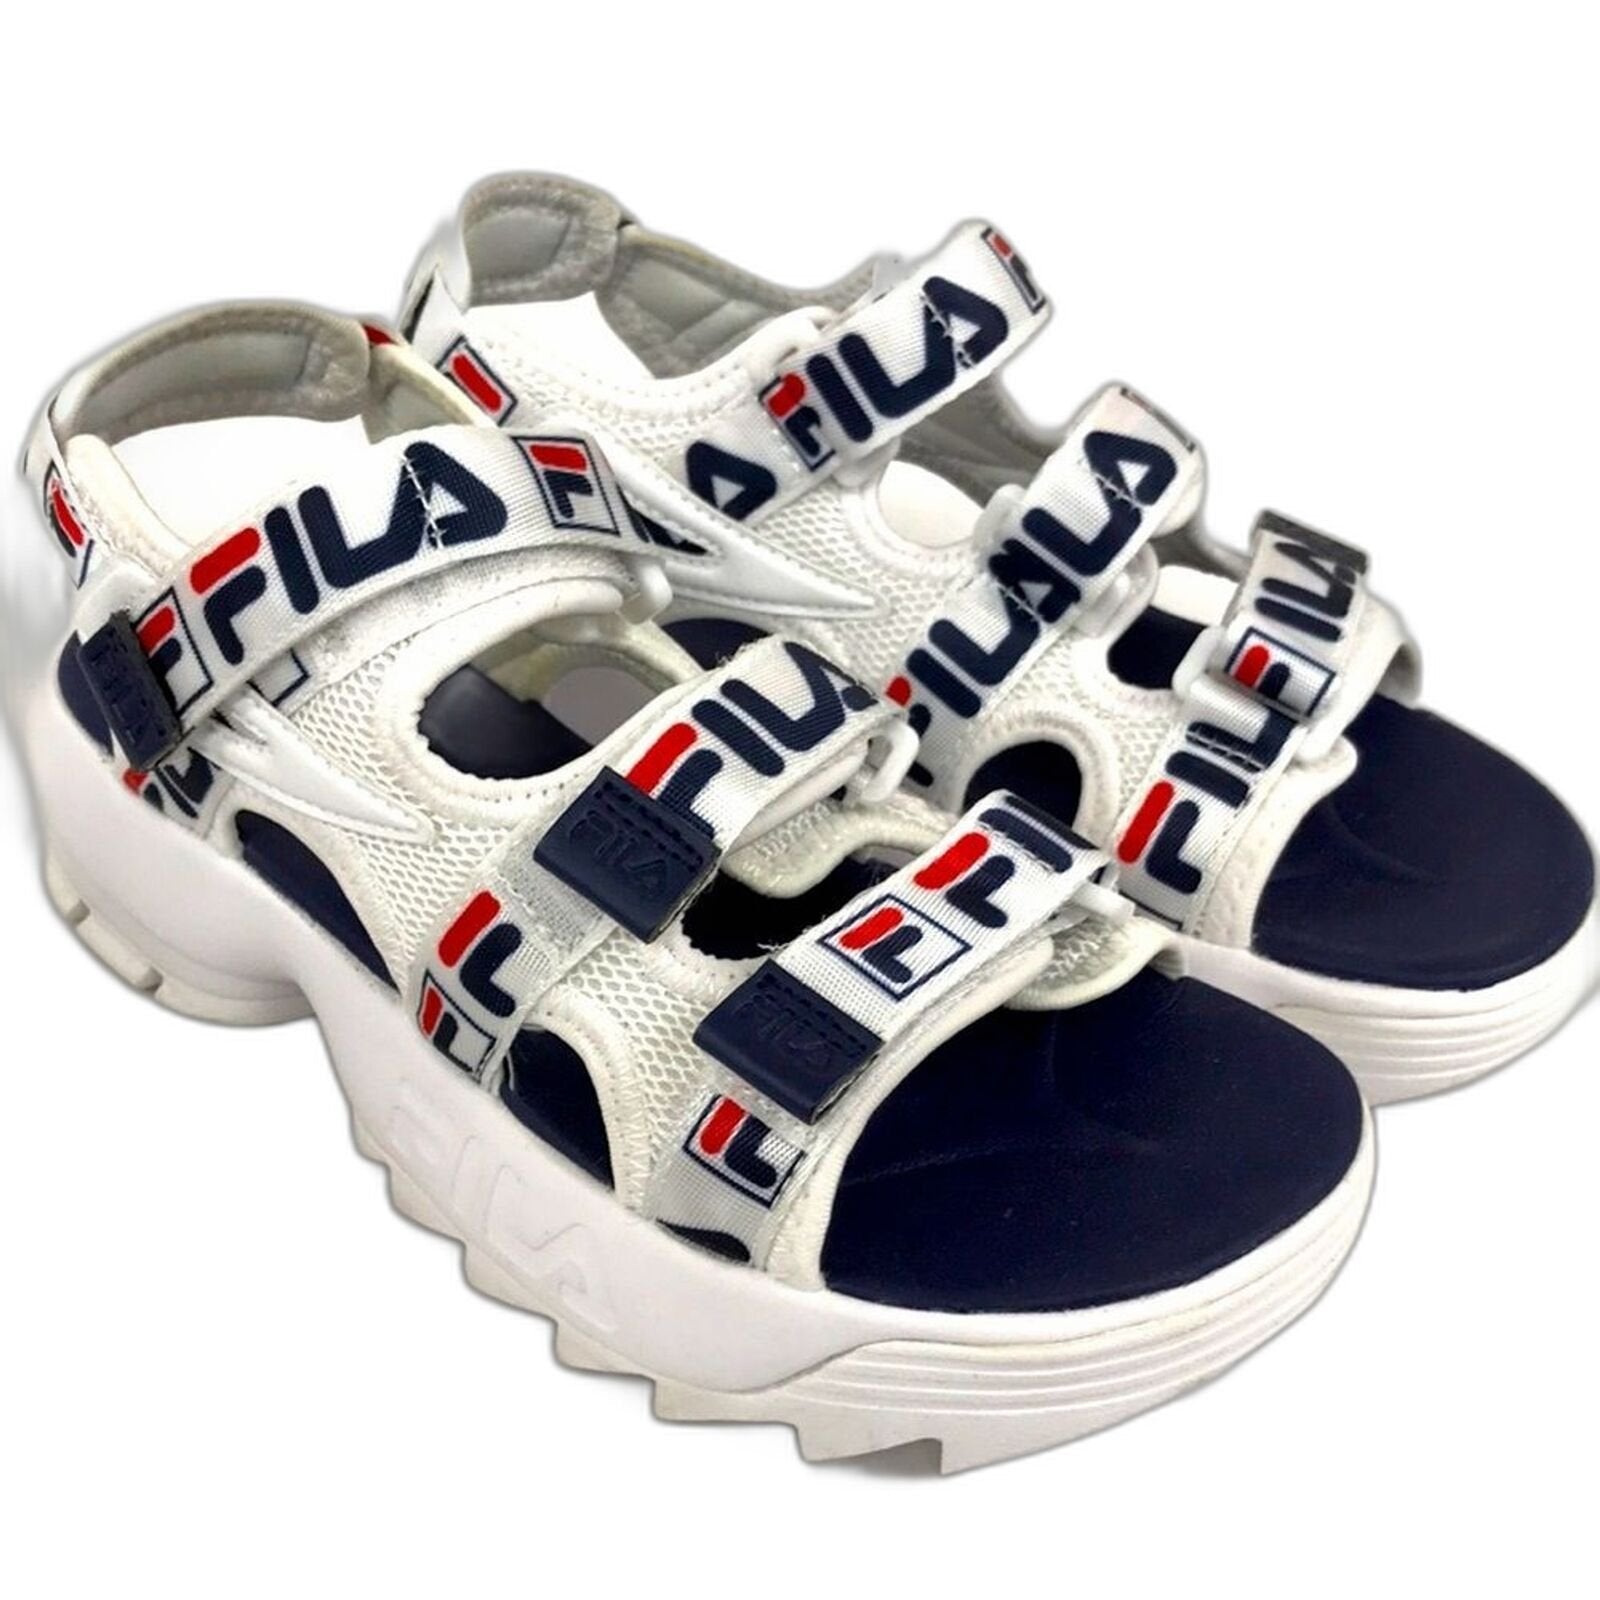 Fila Womens Disruptor Sandals White Navy Red 6 US